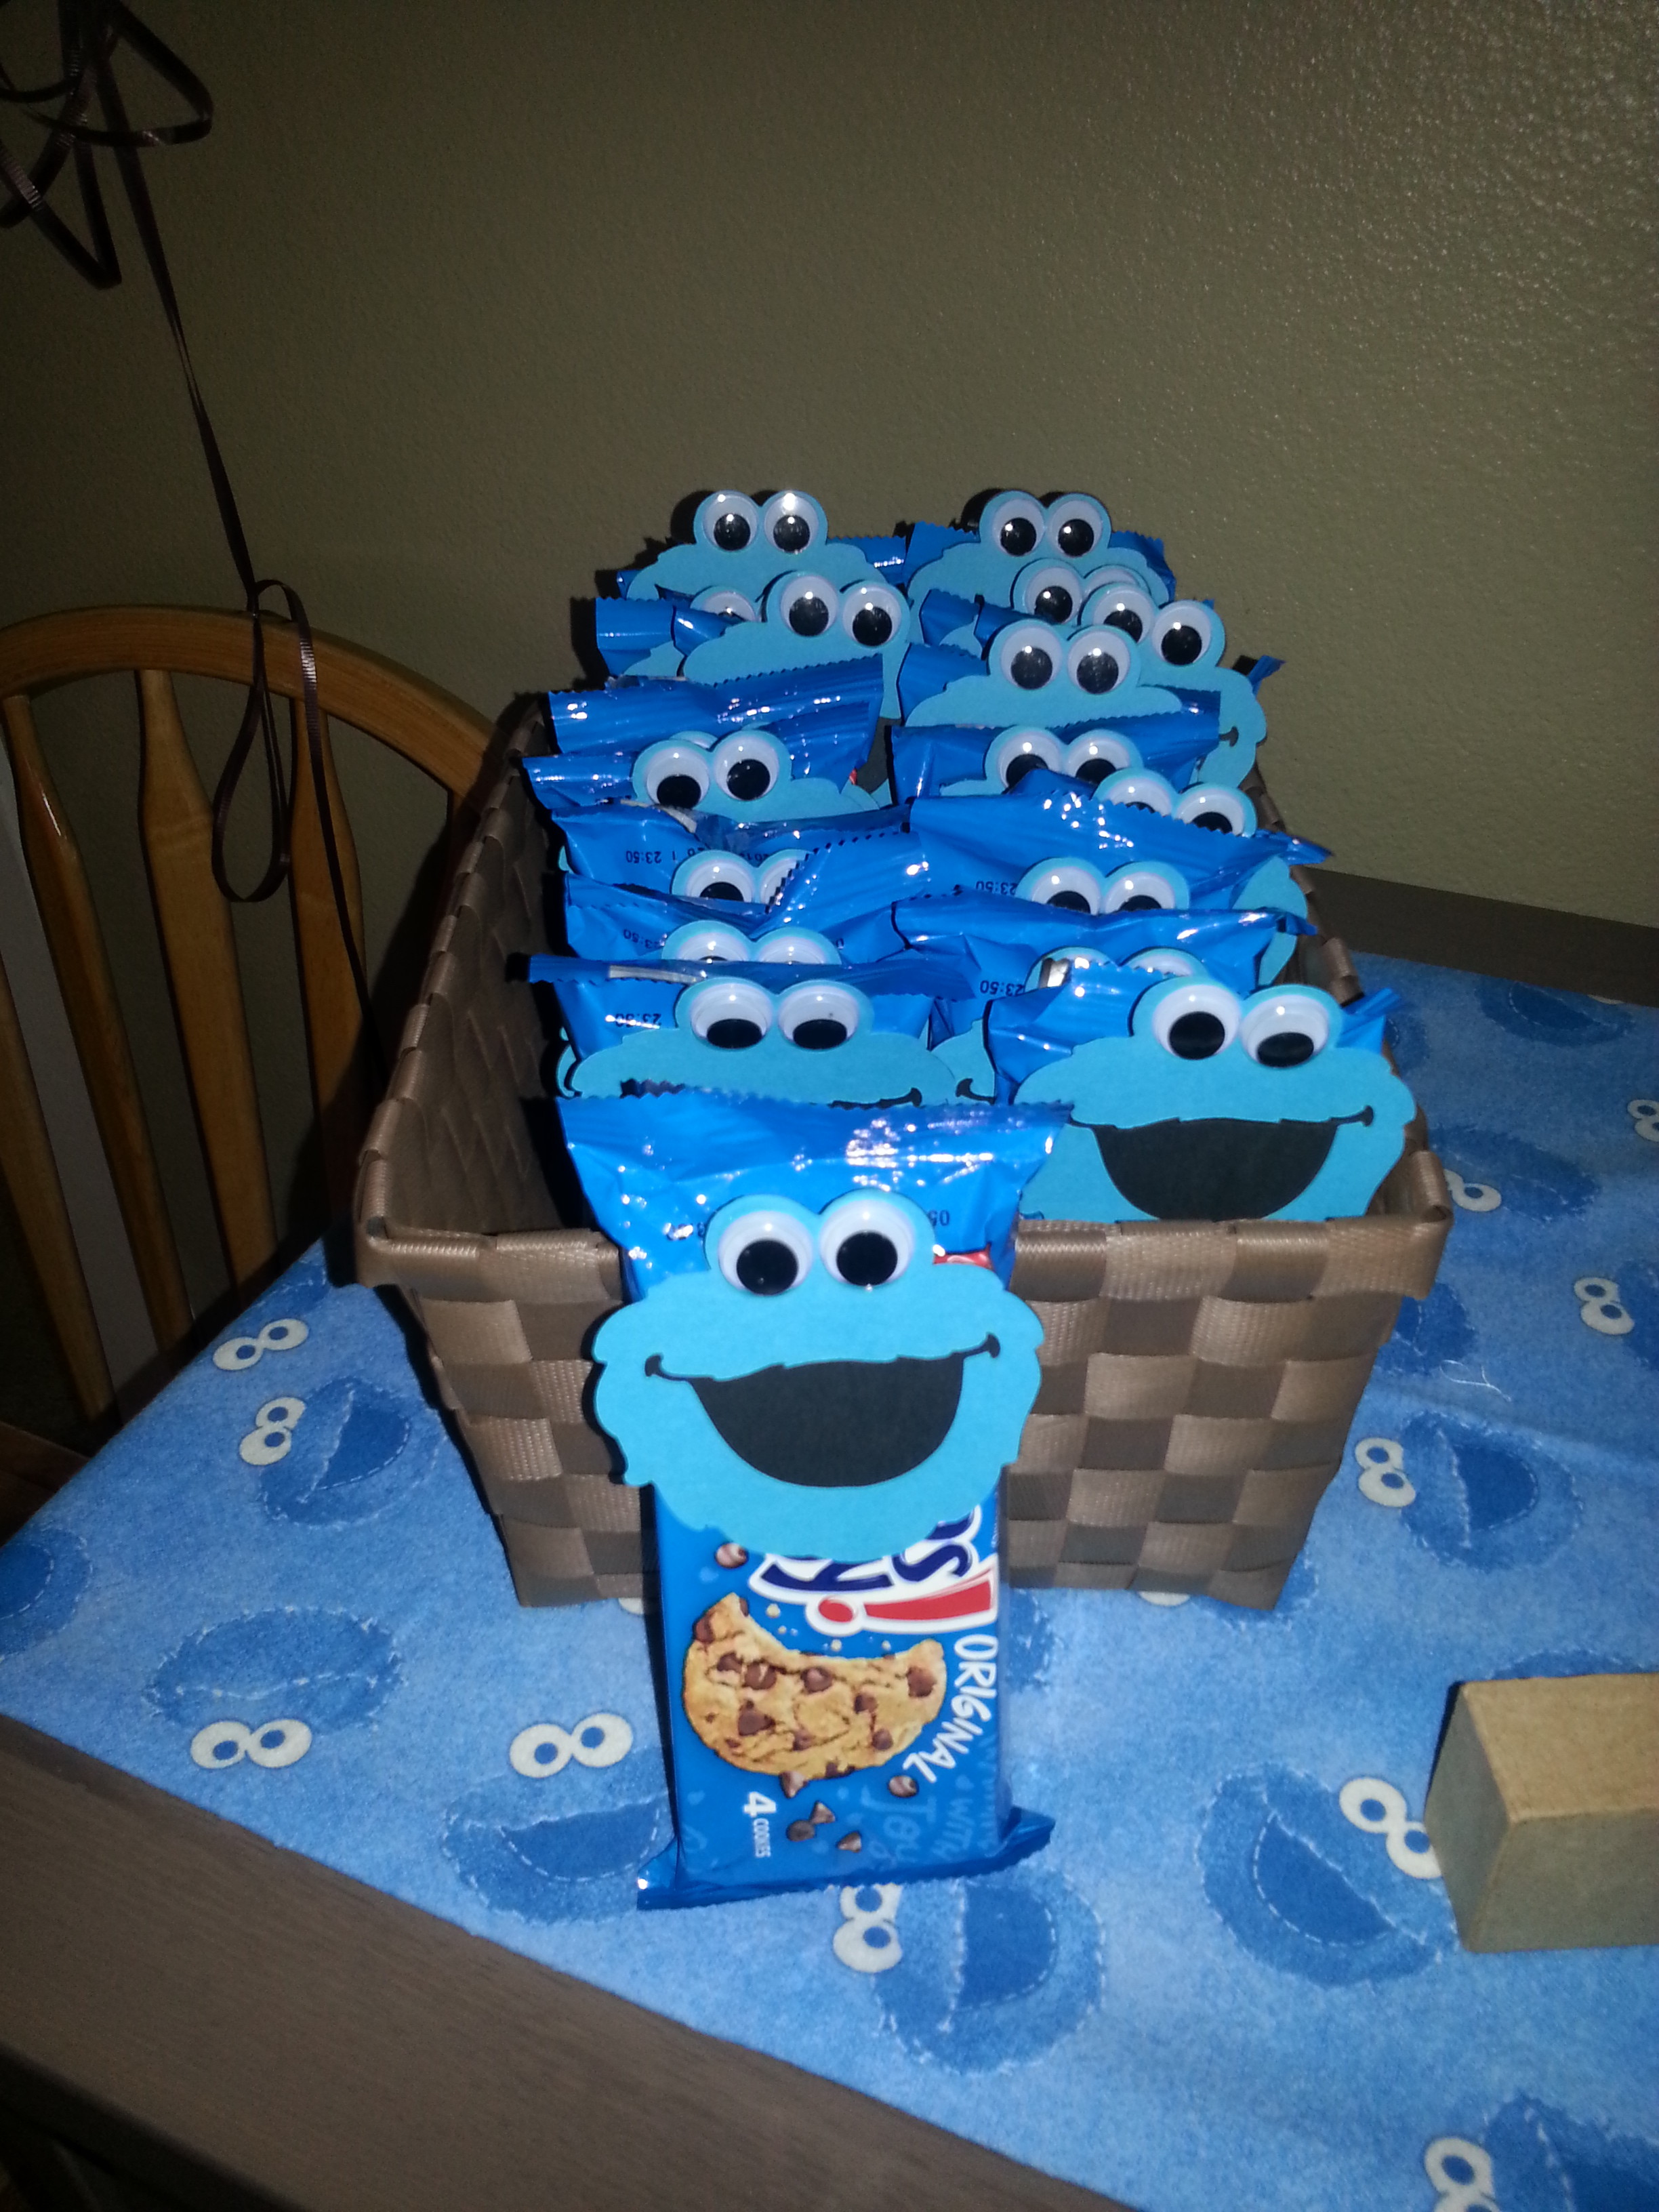 cookiemonster B-shower! Designed by Floral Vision. Cake by Posh Bake, Balloon Decor